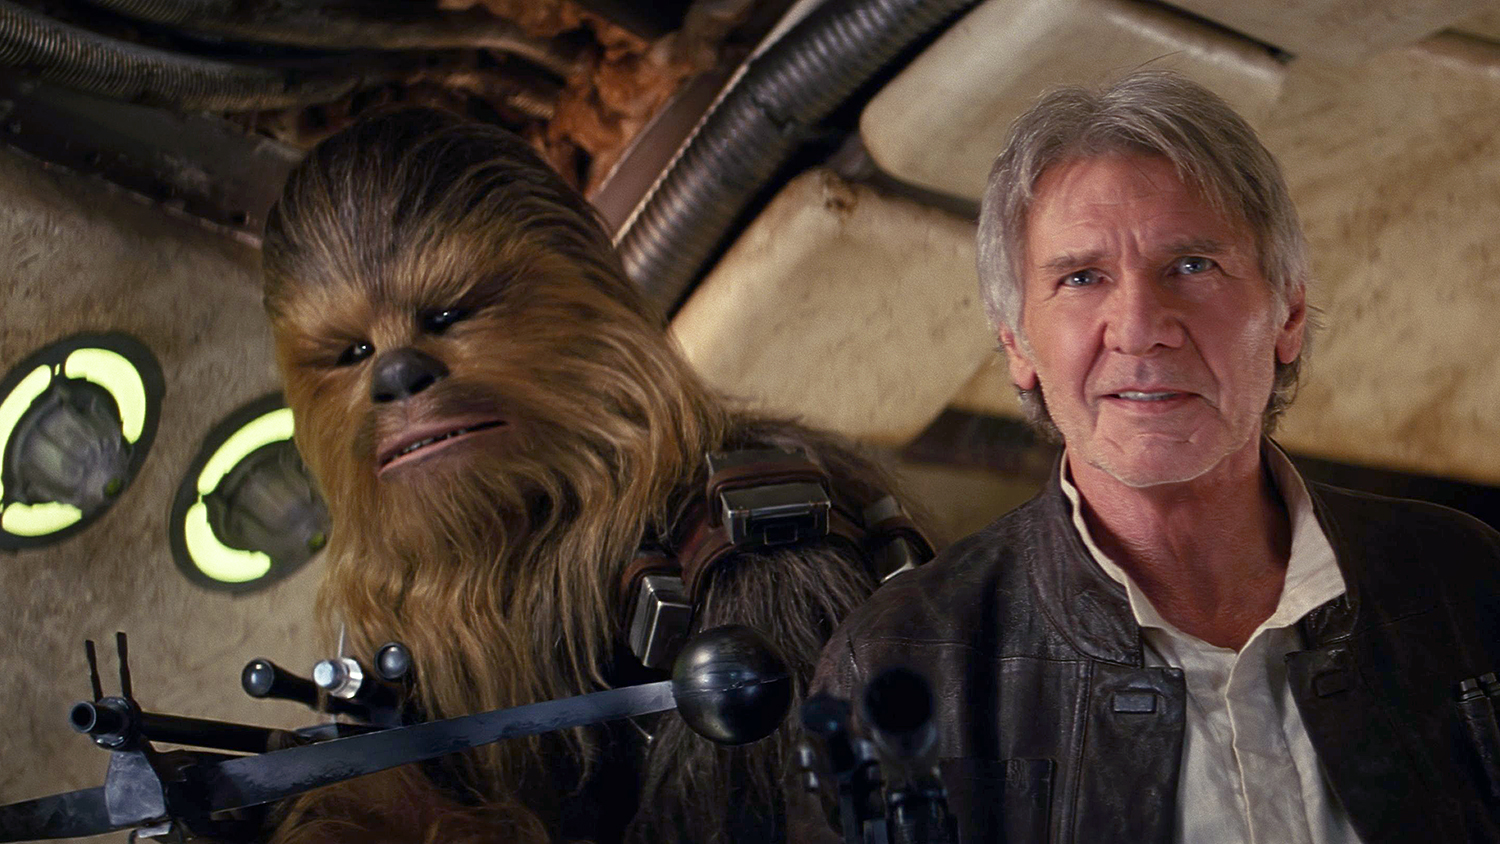 star wars - What are those things in Han's Pocket? - Science Fiction &  Fantasy Stack Exchange